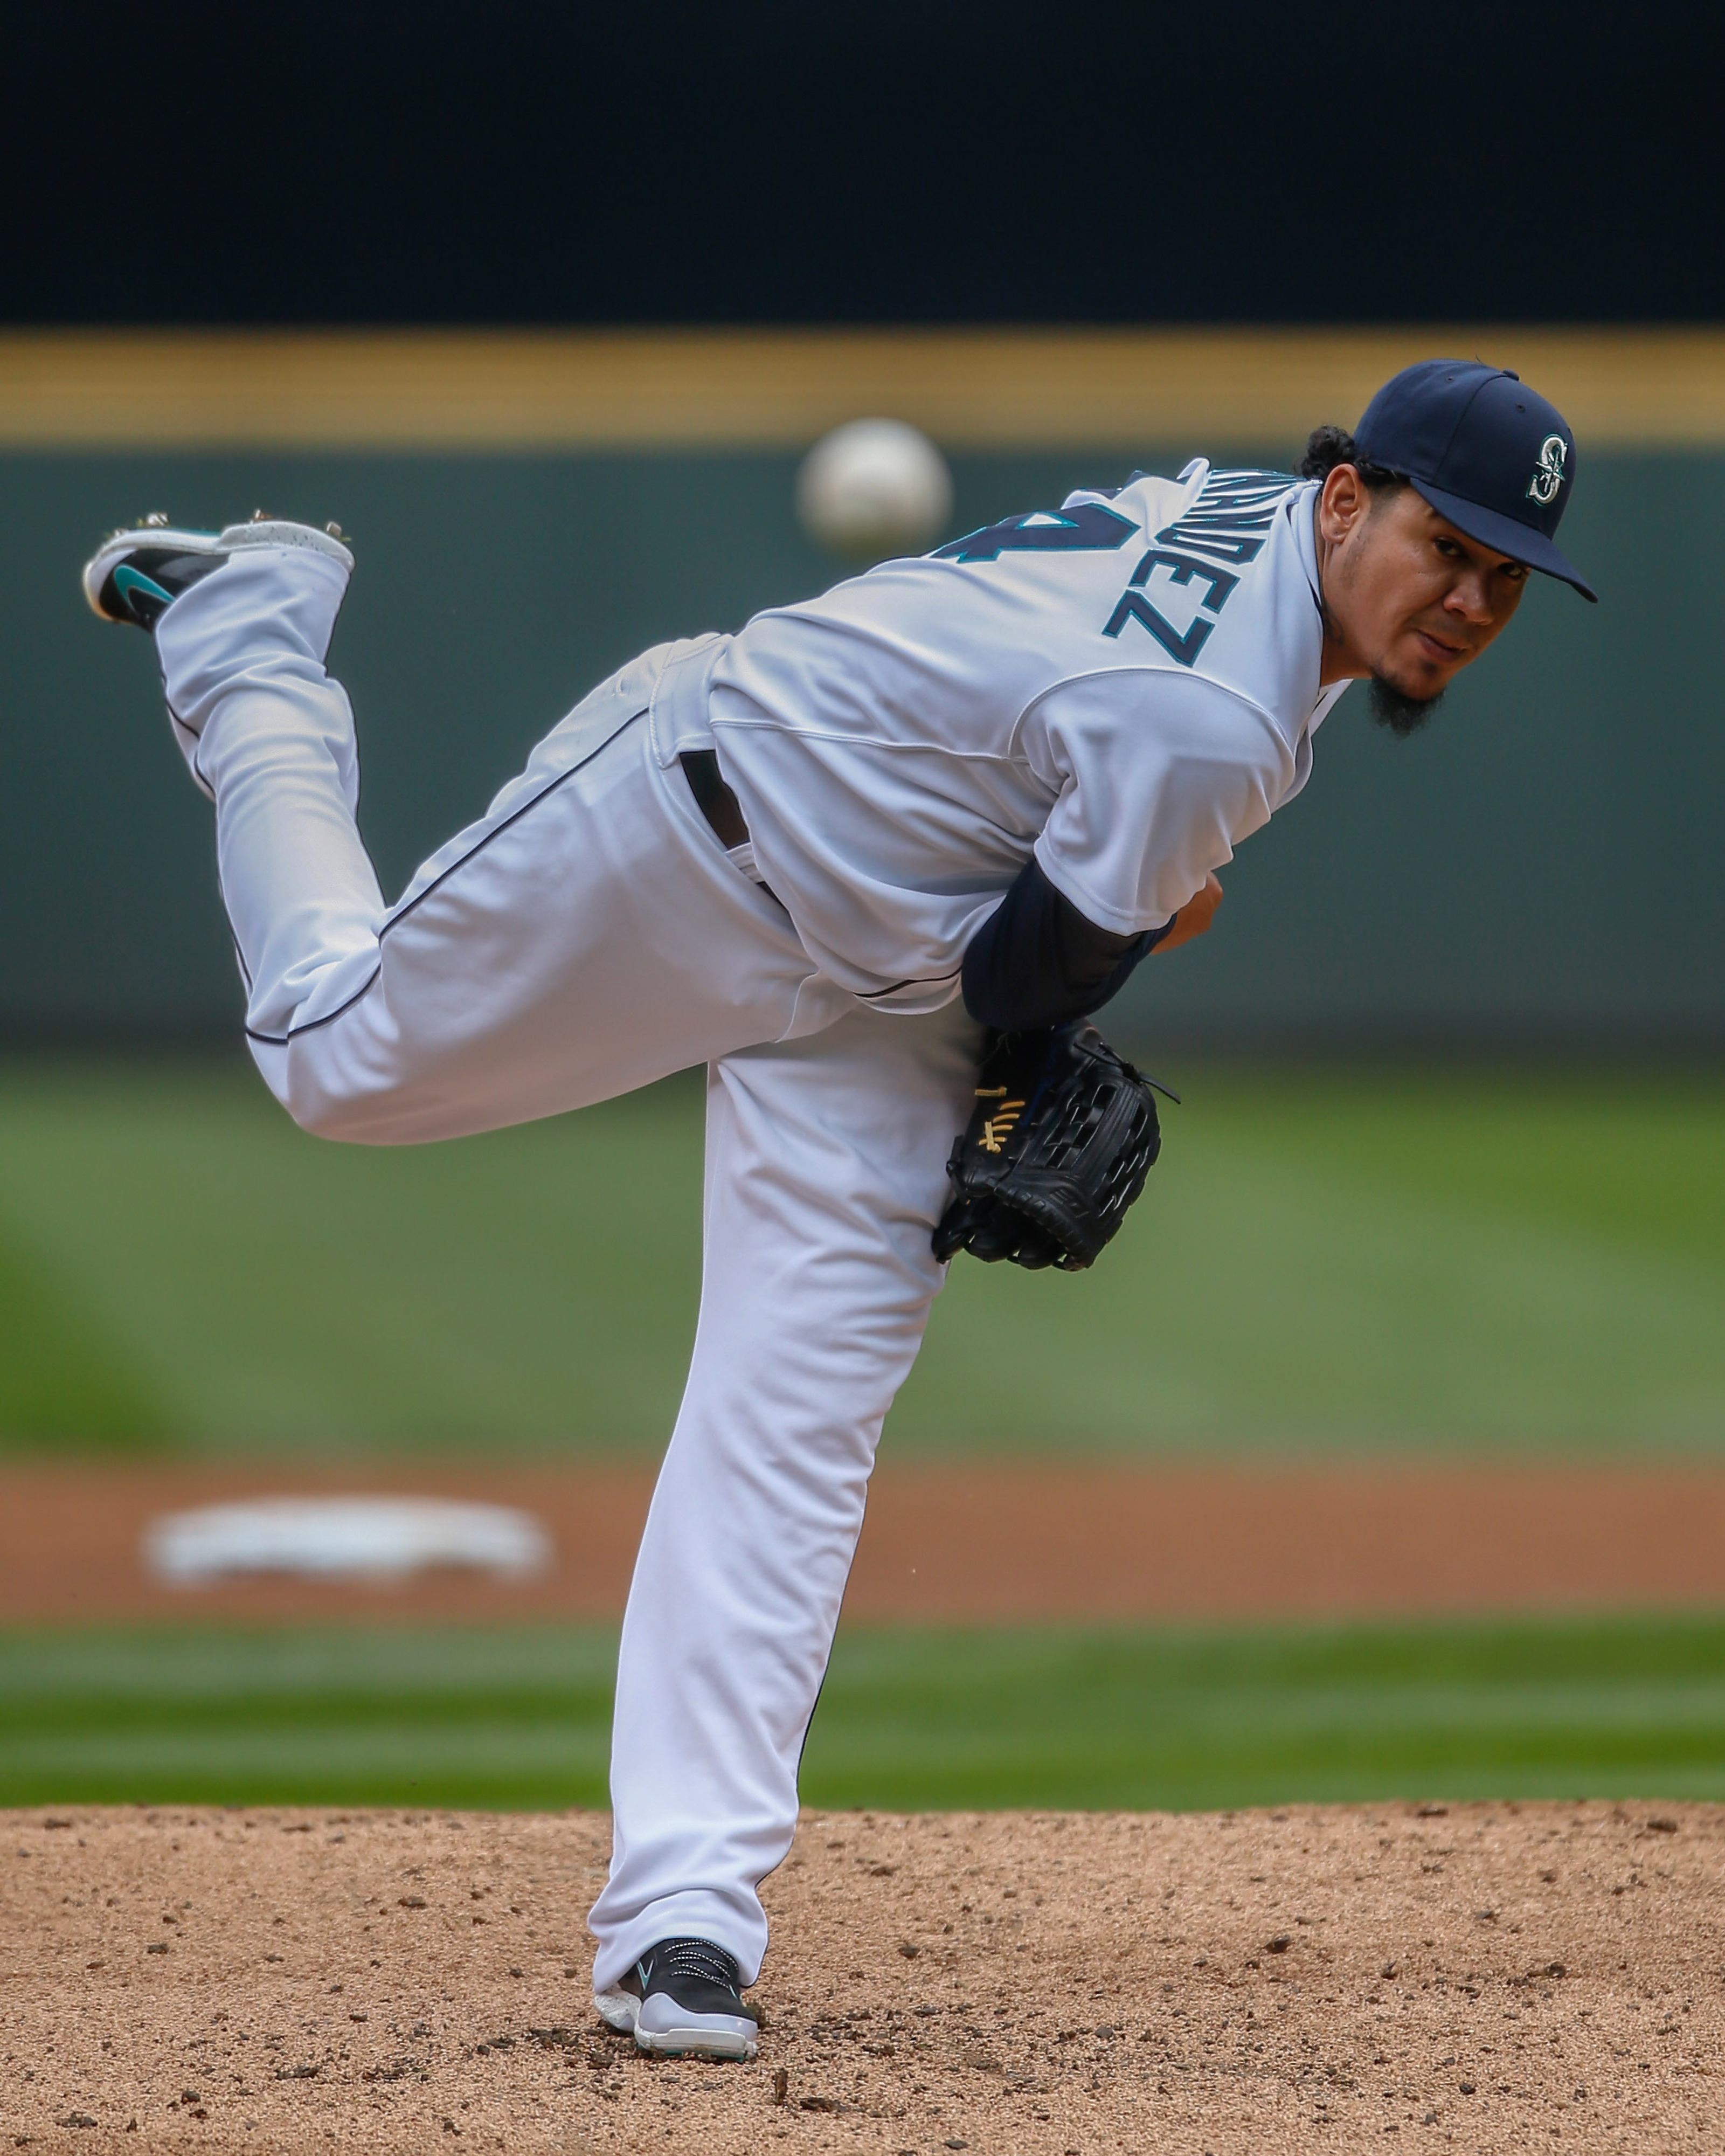 King Felix went away from his fastball and to his changeup in 2014, but he wasn't alone in altering his offerings this season.